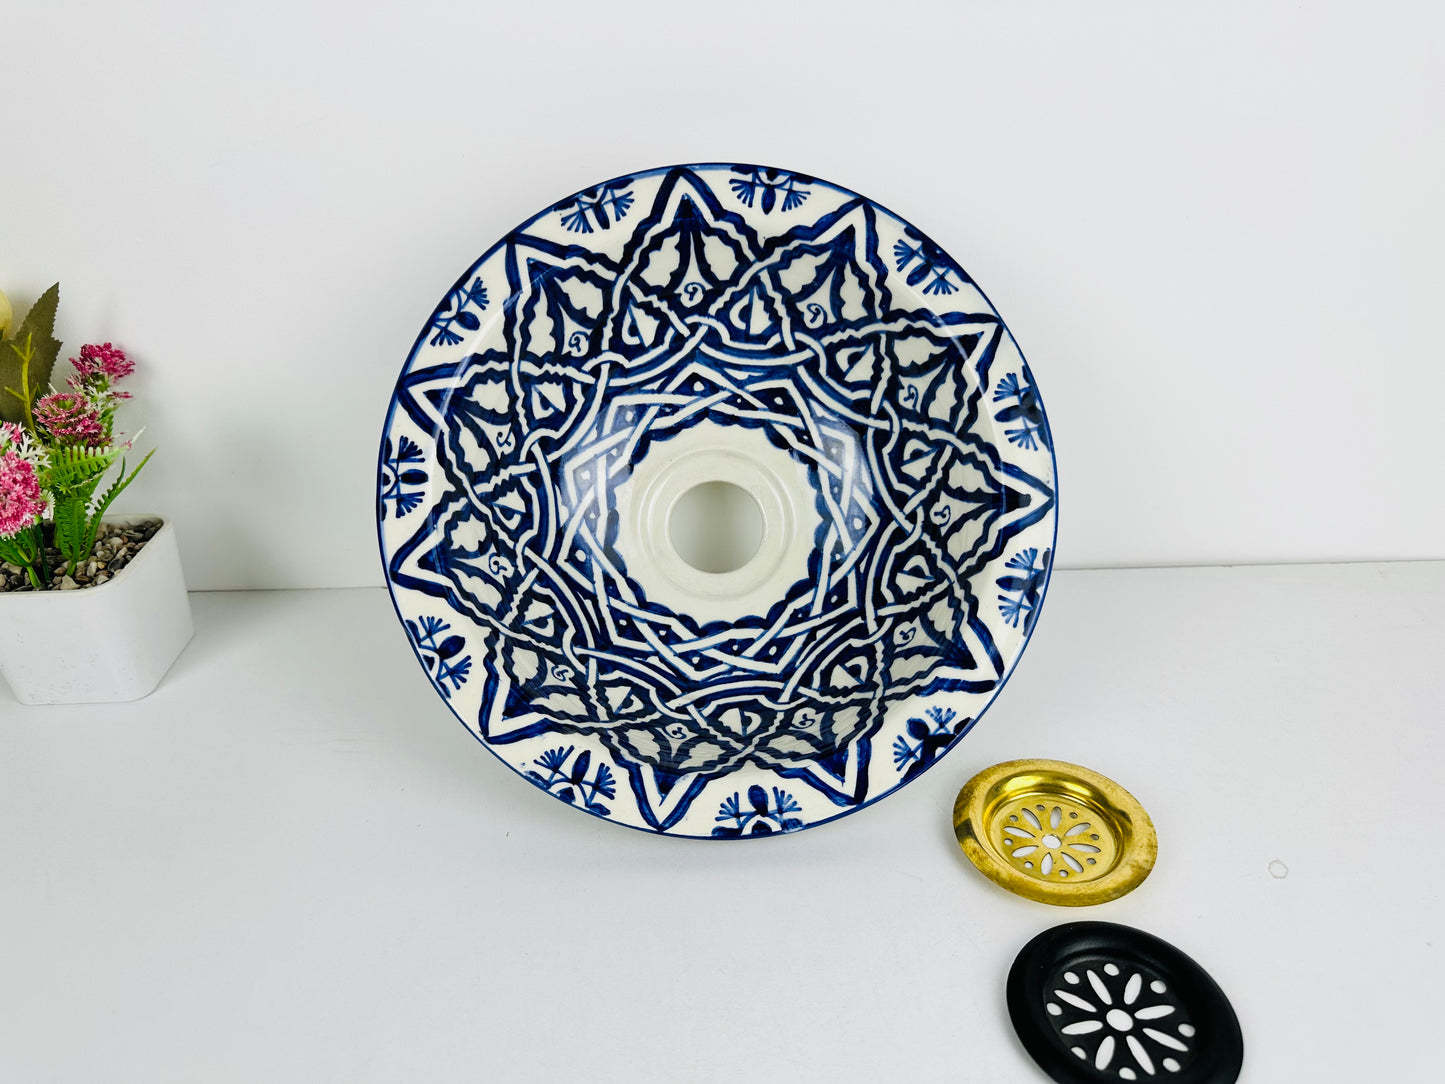 Blue Medina: Handcrafted Ceramic Sink with Moroccan Blue Design